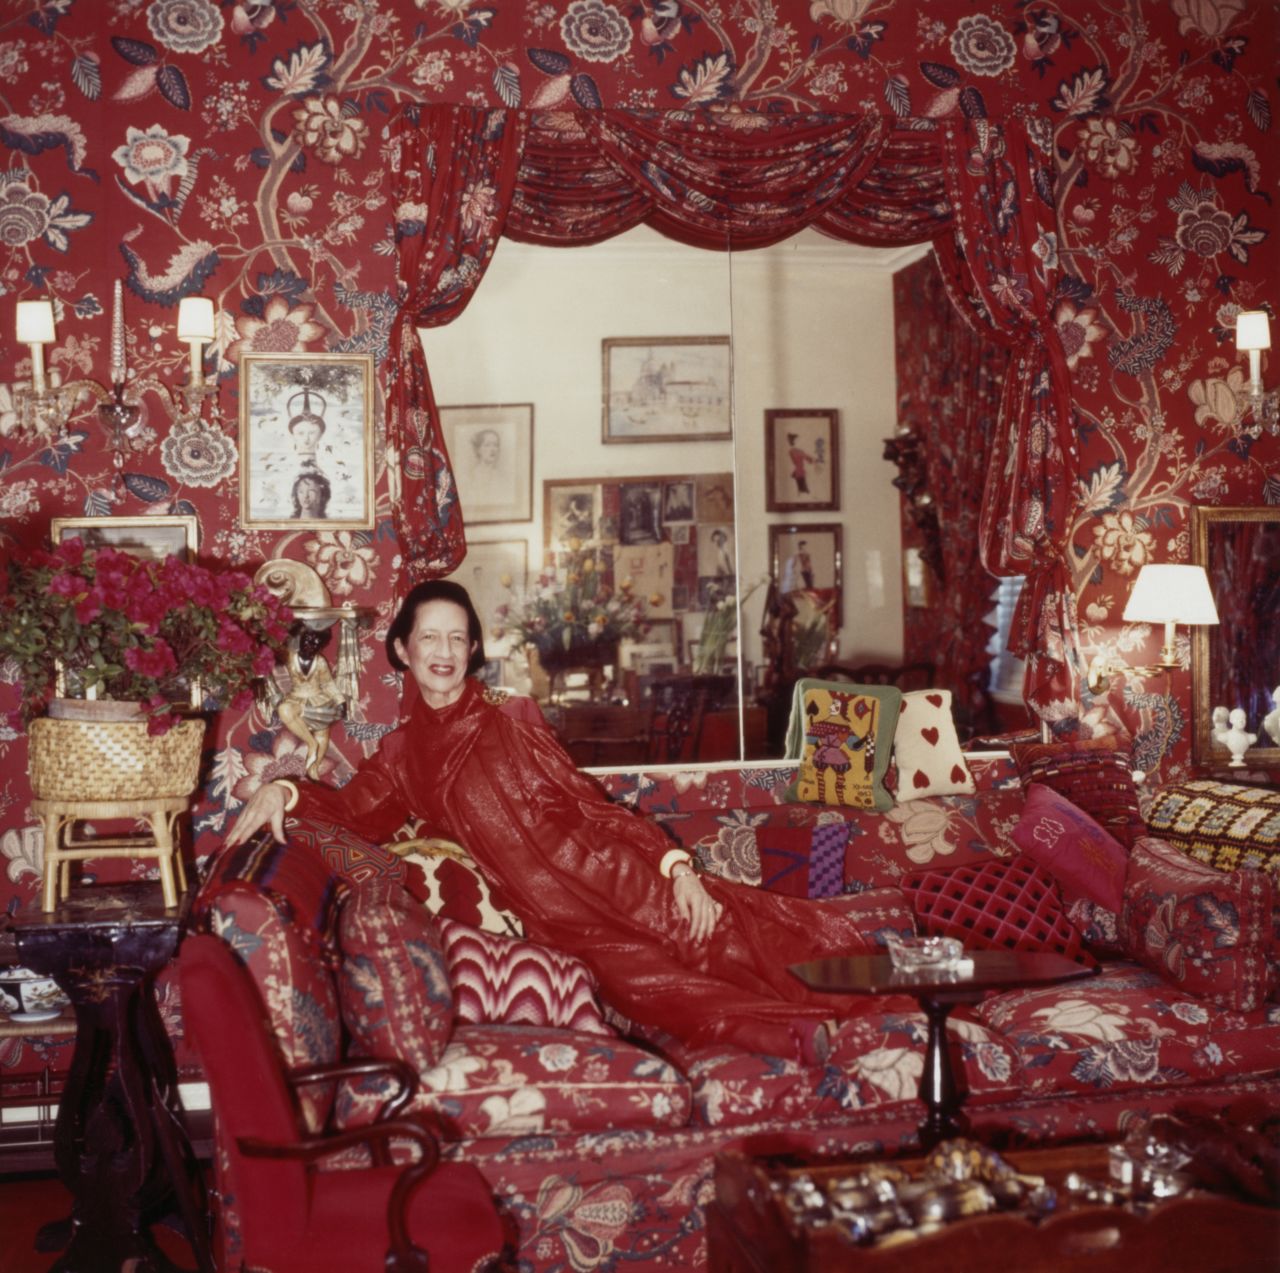 Diana Vreeland in her famous red living room, nicknamed "a garden in hell."